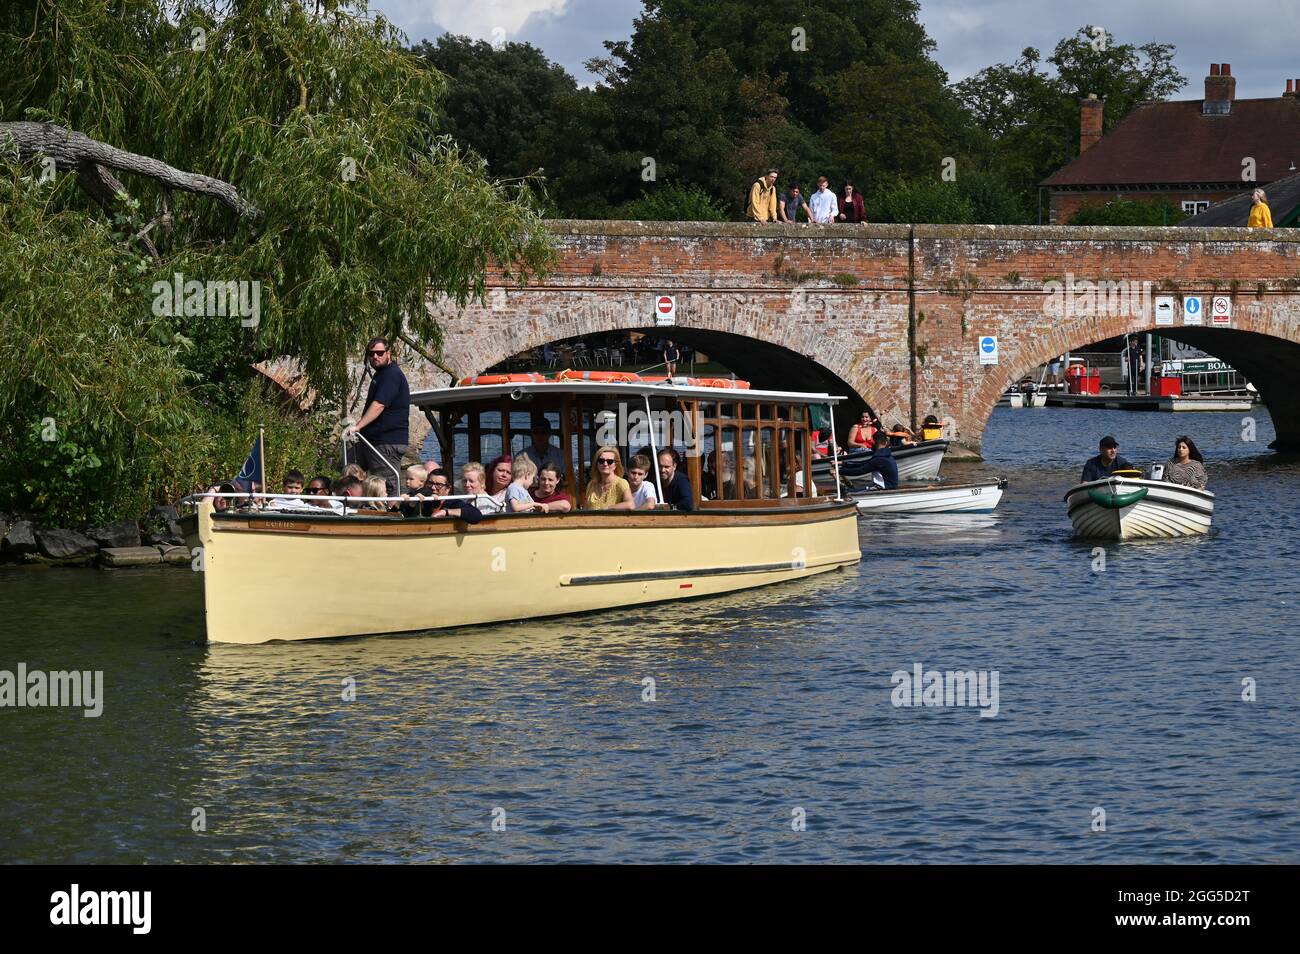 A sightseeing boat on the River Avon in Stratford upon Avon, Warwickshire approaches the jetty to disembark its passengers Stock Photo